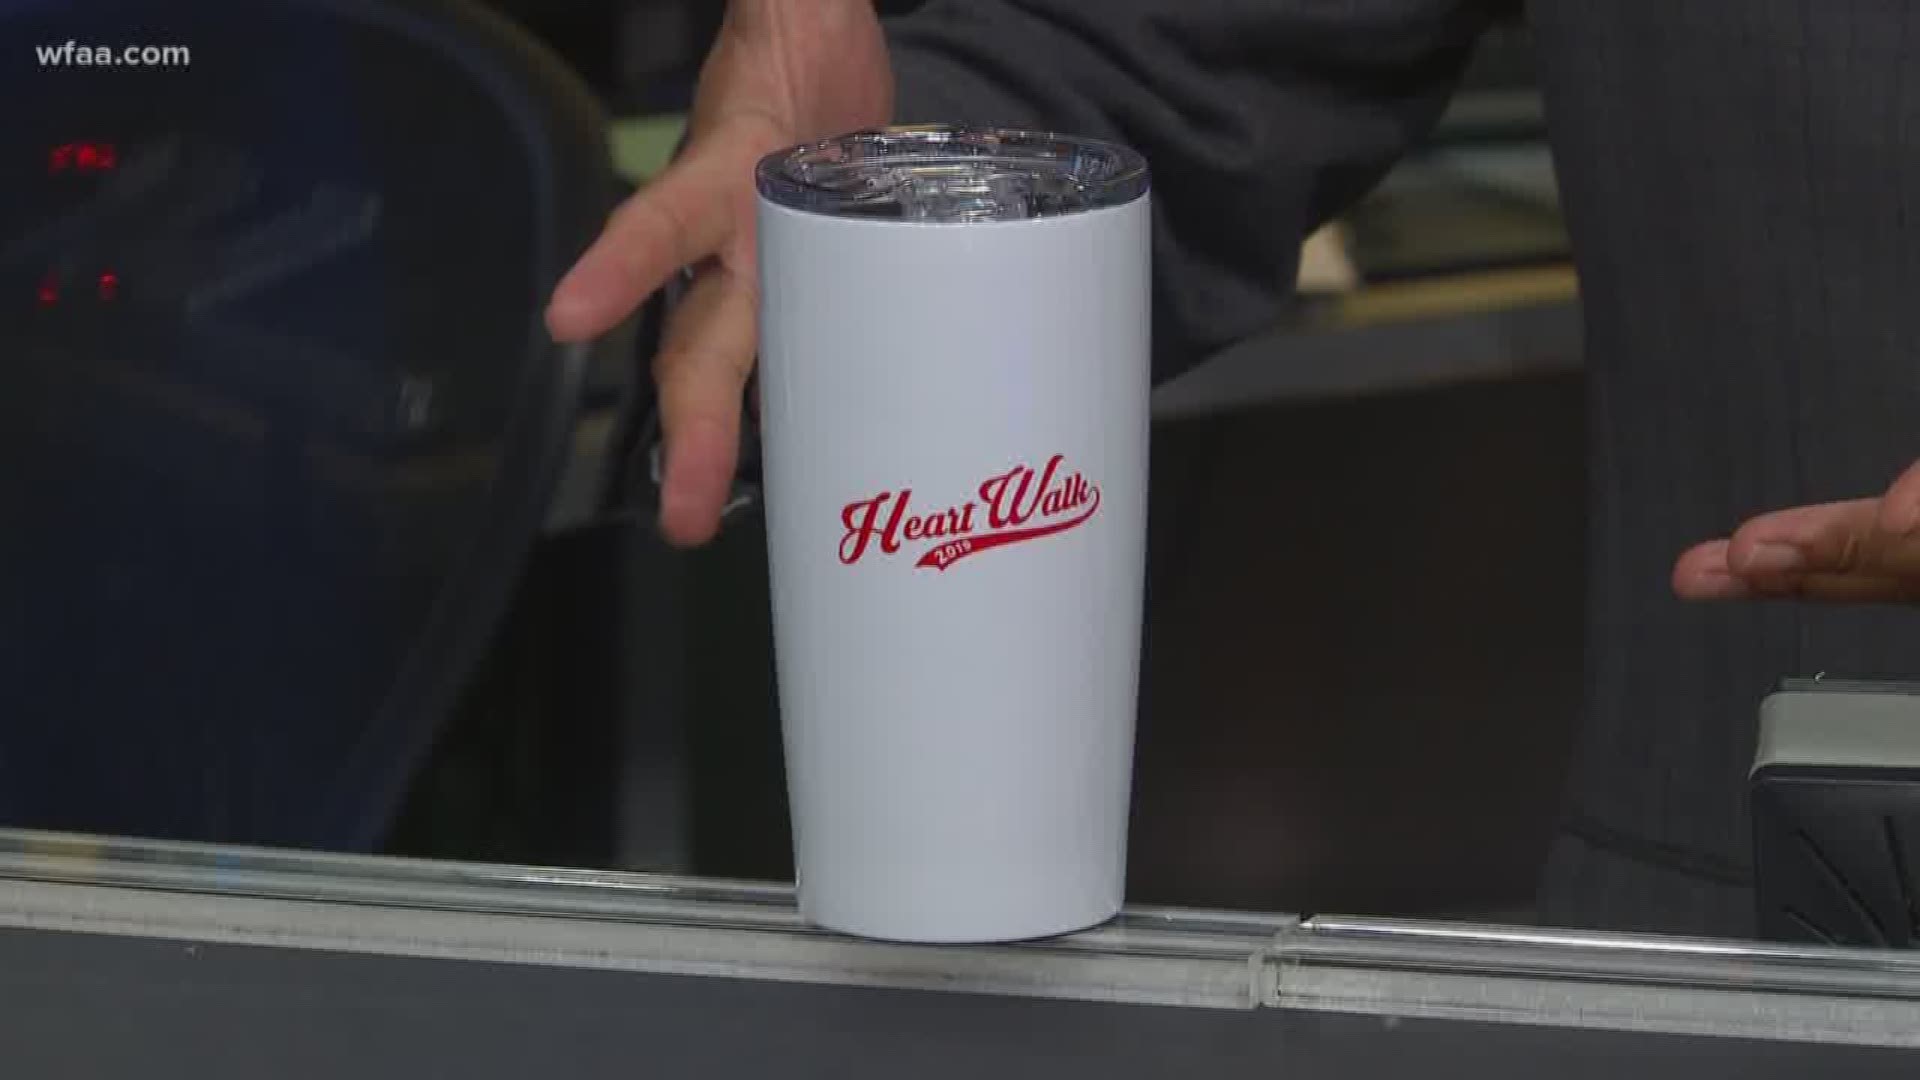 What's up with Greg's cup? The American Heart Association